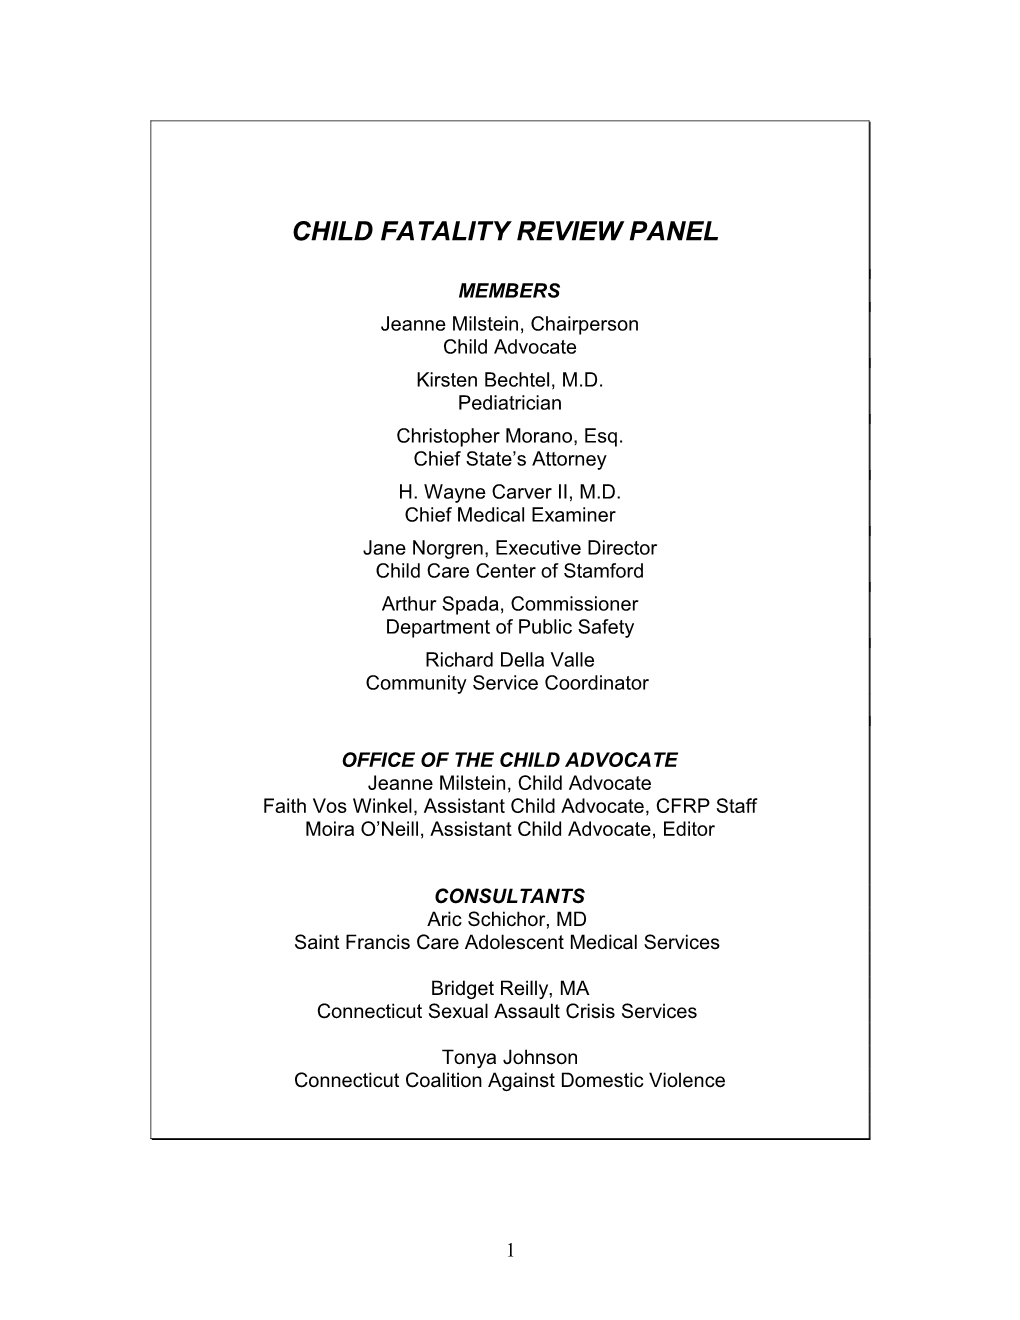 Child Fatality Review Panel